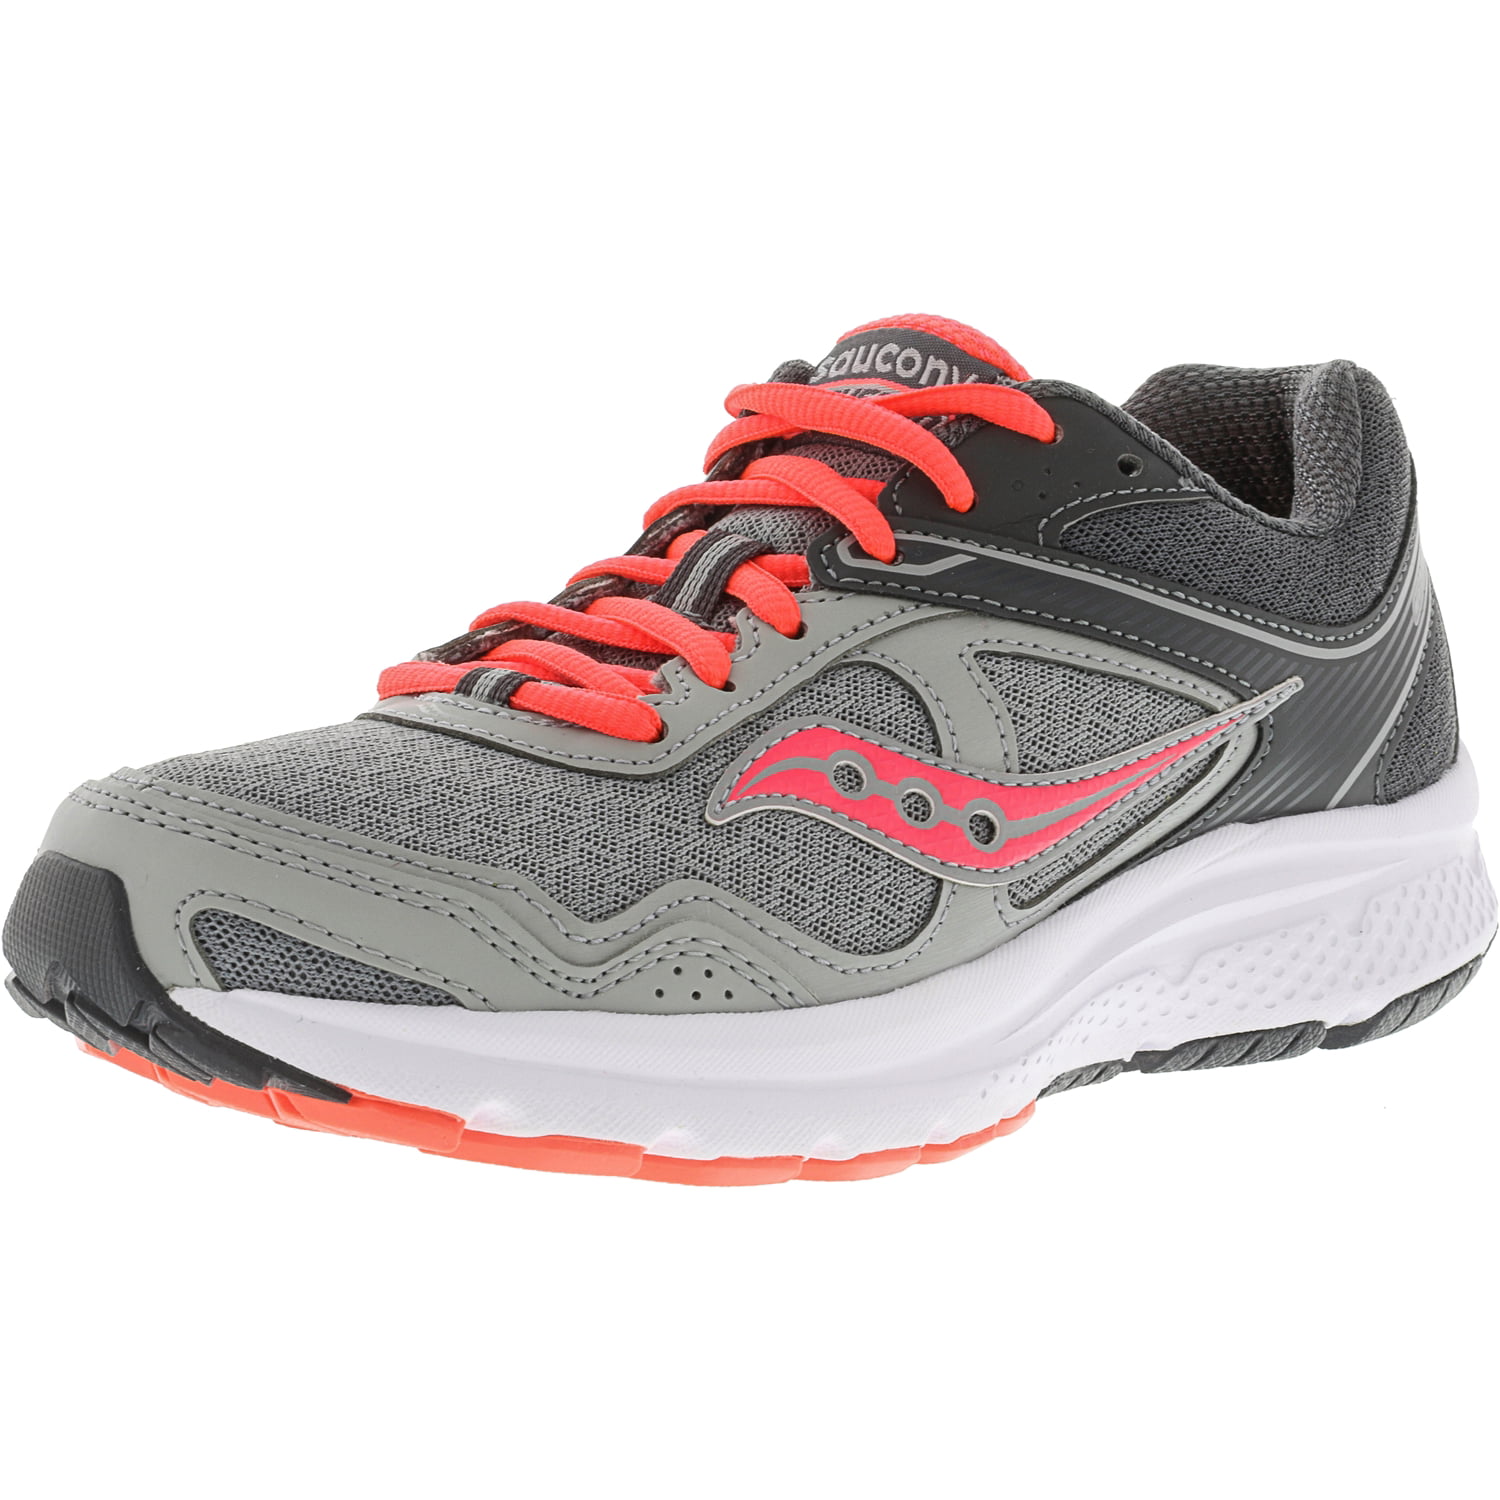 Buy > saucony women's grid cohesion > in stock